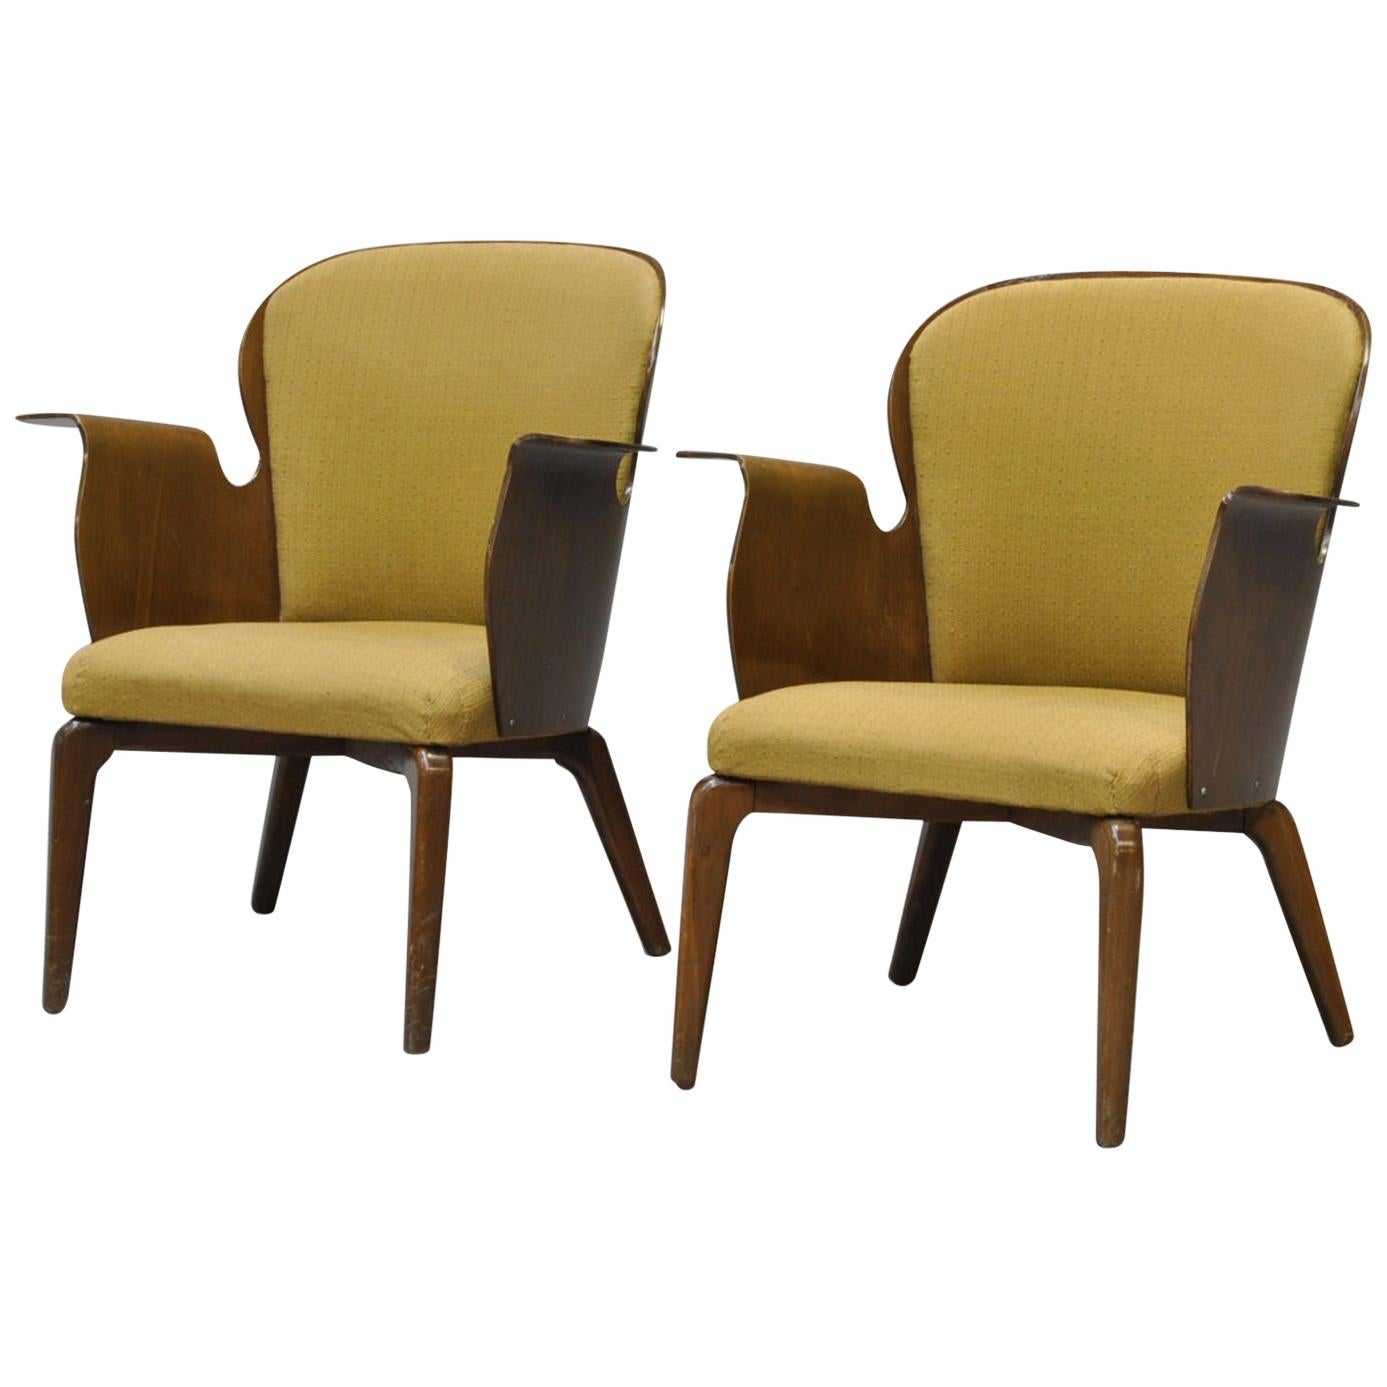 Pair of Danish Modern Bentwood 1950s Lounge Chairs by Hans Olsen